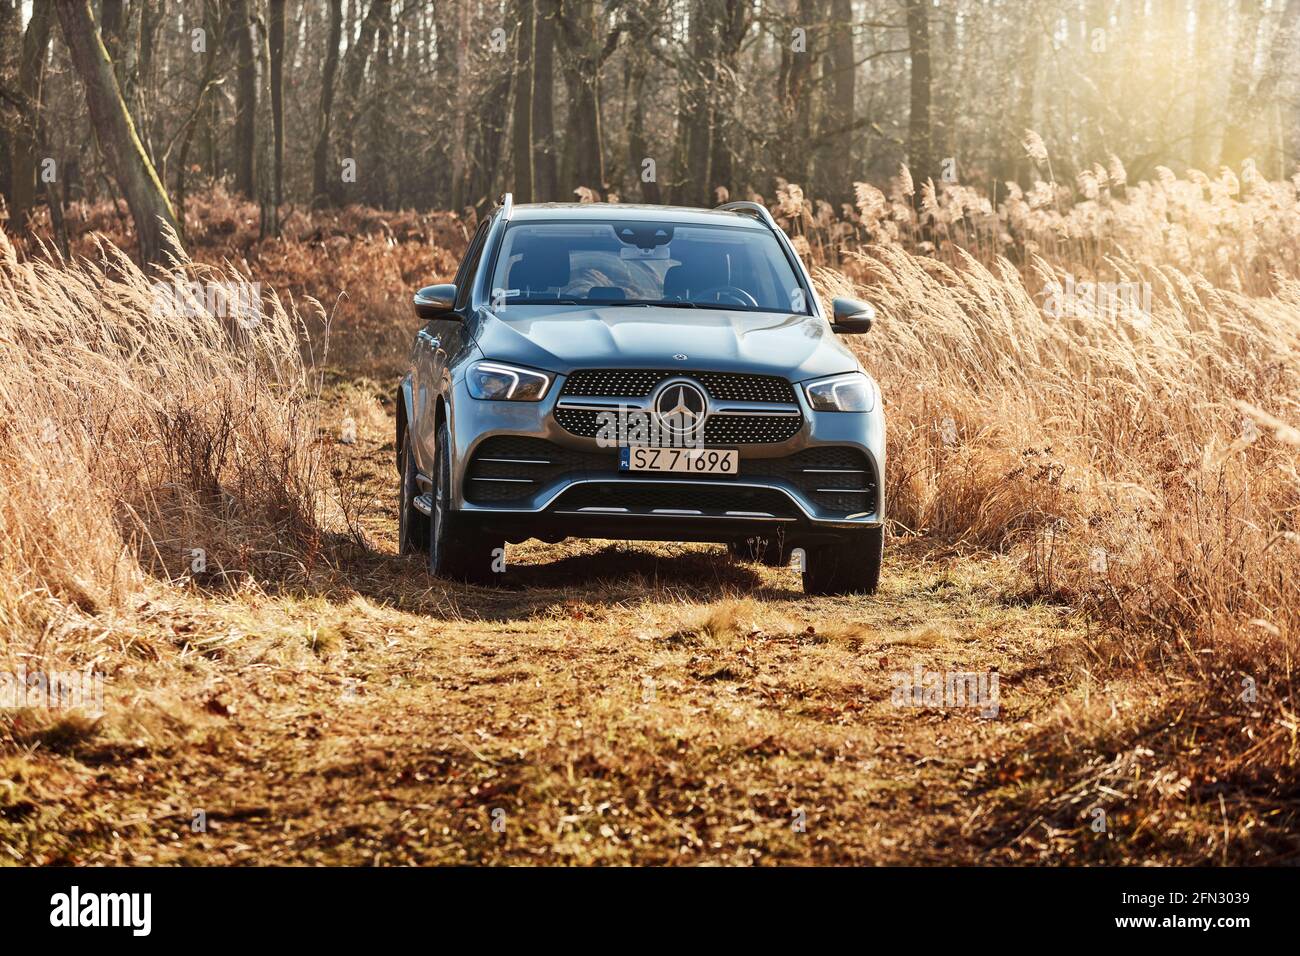 Orzesze/Poland - 01.12.2020: Luxury Mercedes GLE with 4x4 drive on the off-road. V6 engine, 367 hp.The car is on the road in front of the viewer. Ther Stock Photo